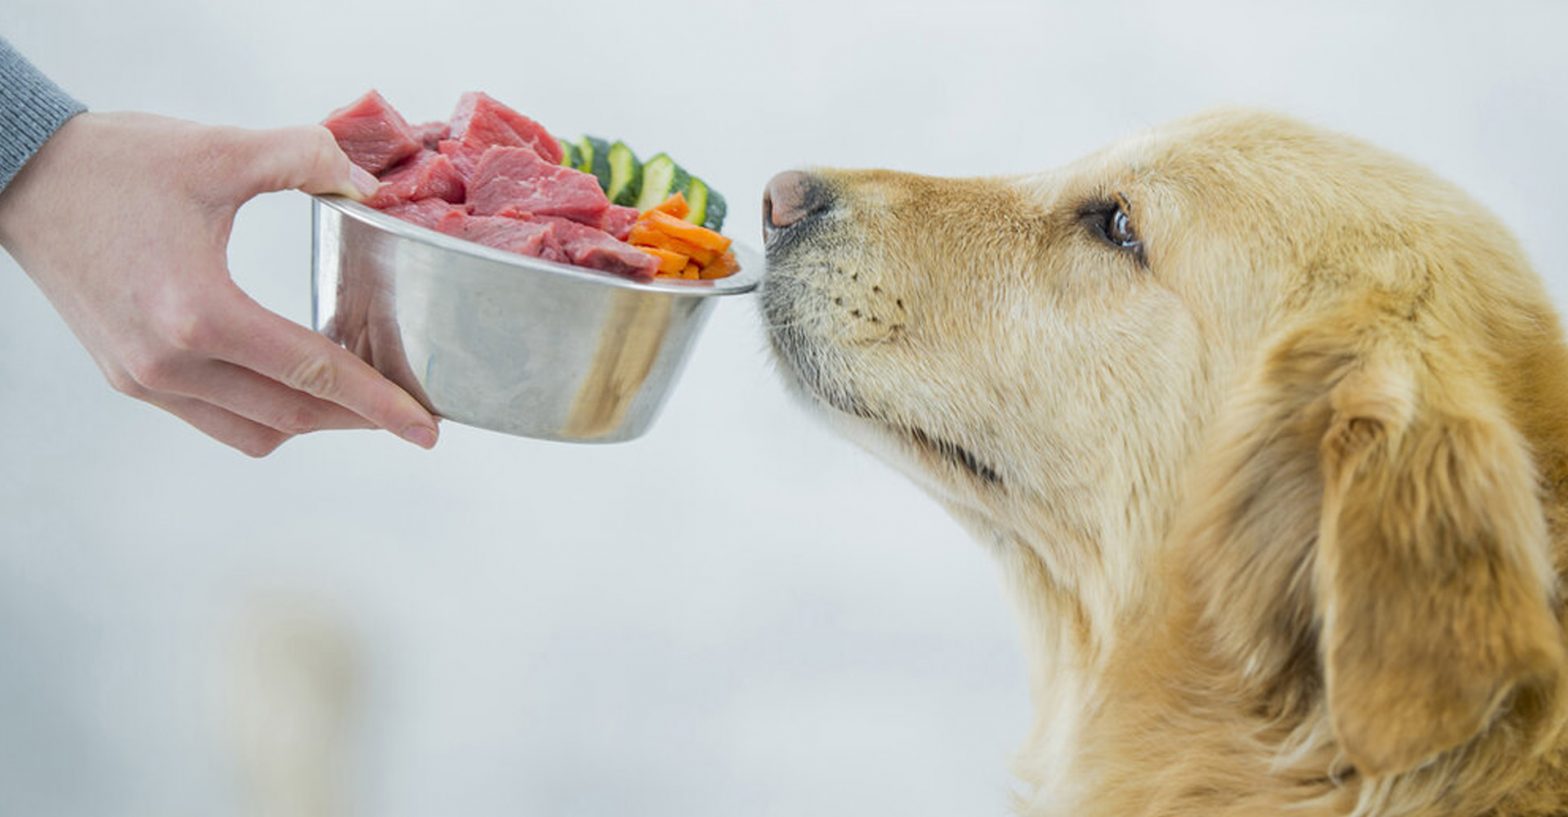 lindsay giguiere, healthy food for dogs